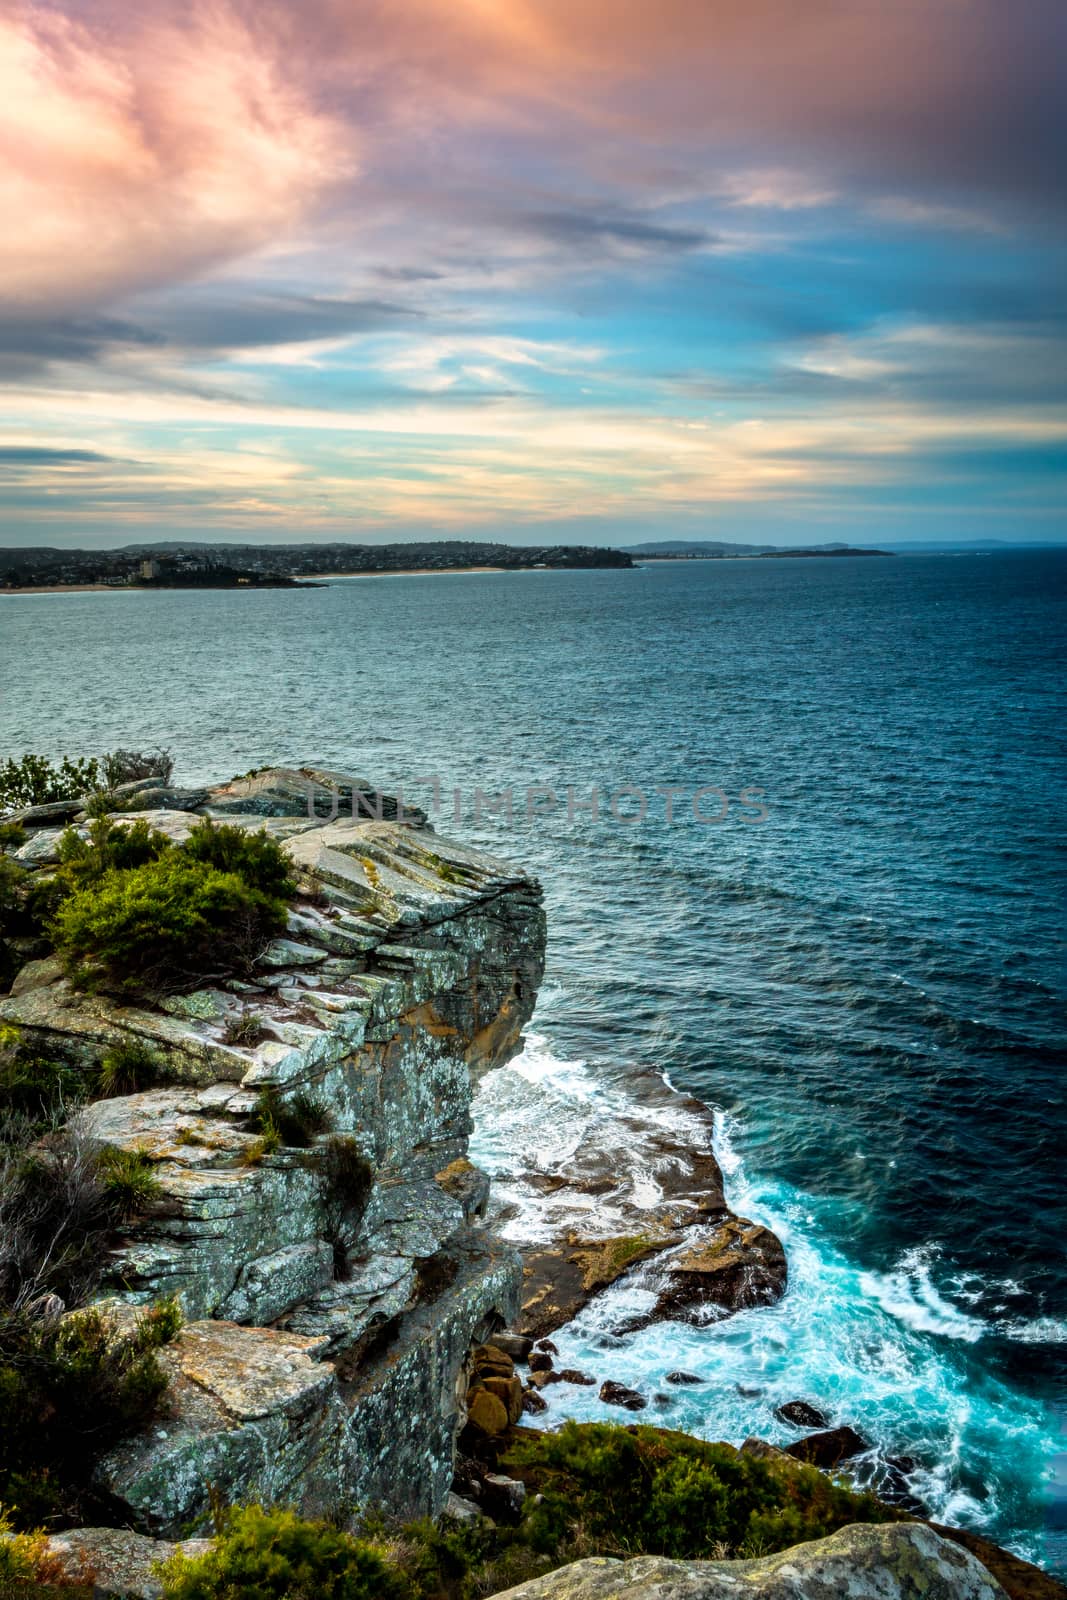 Views over the coastline of Manly Australia by lovleah